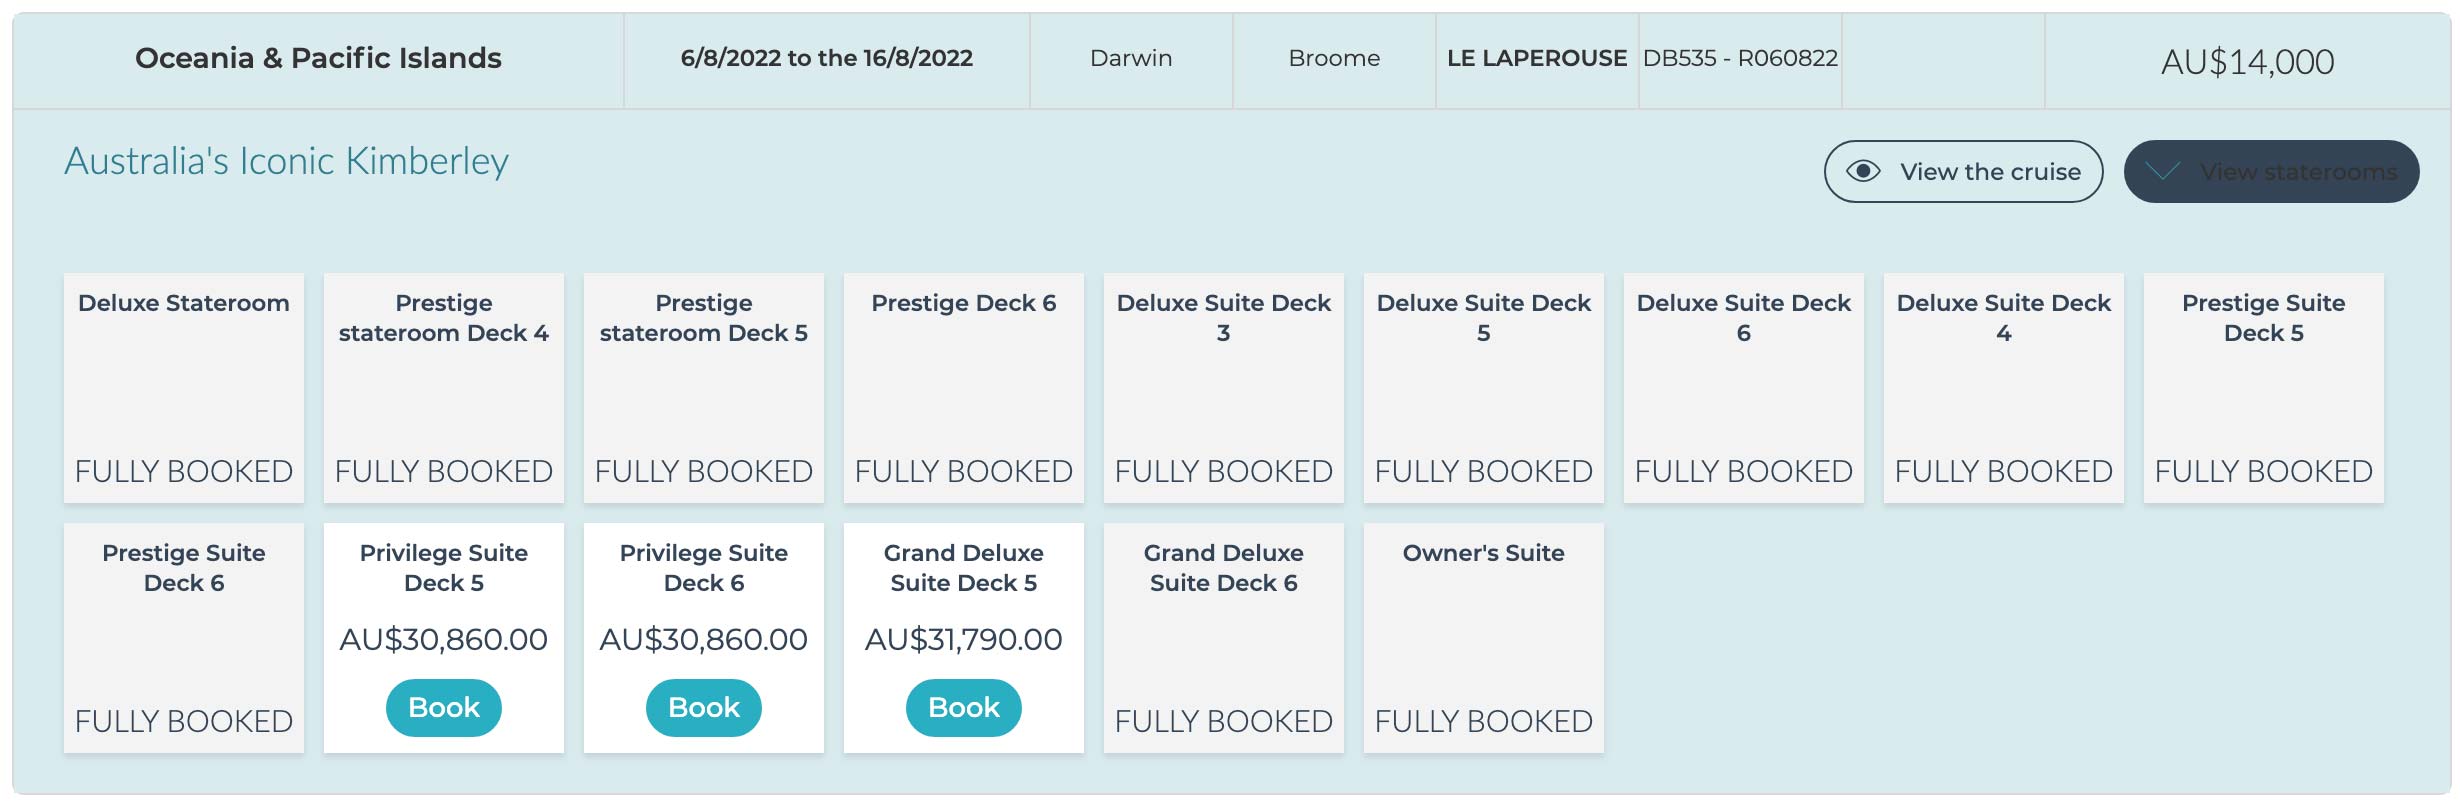 LAPEROUSE-06-AUG-2022-cruise-prices